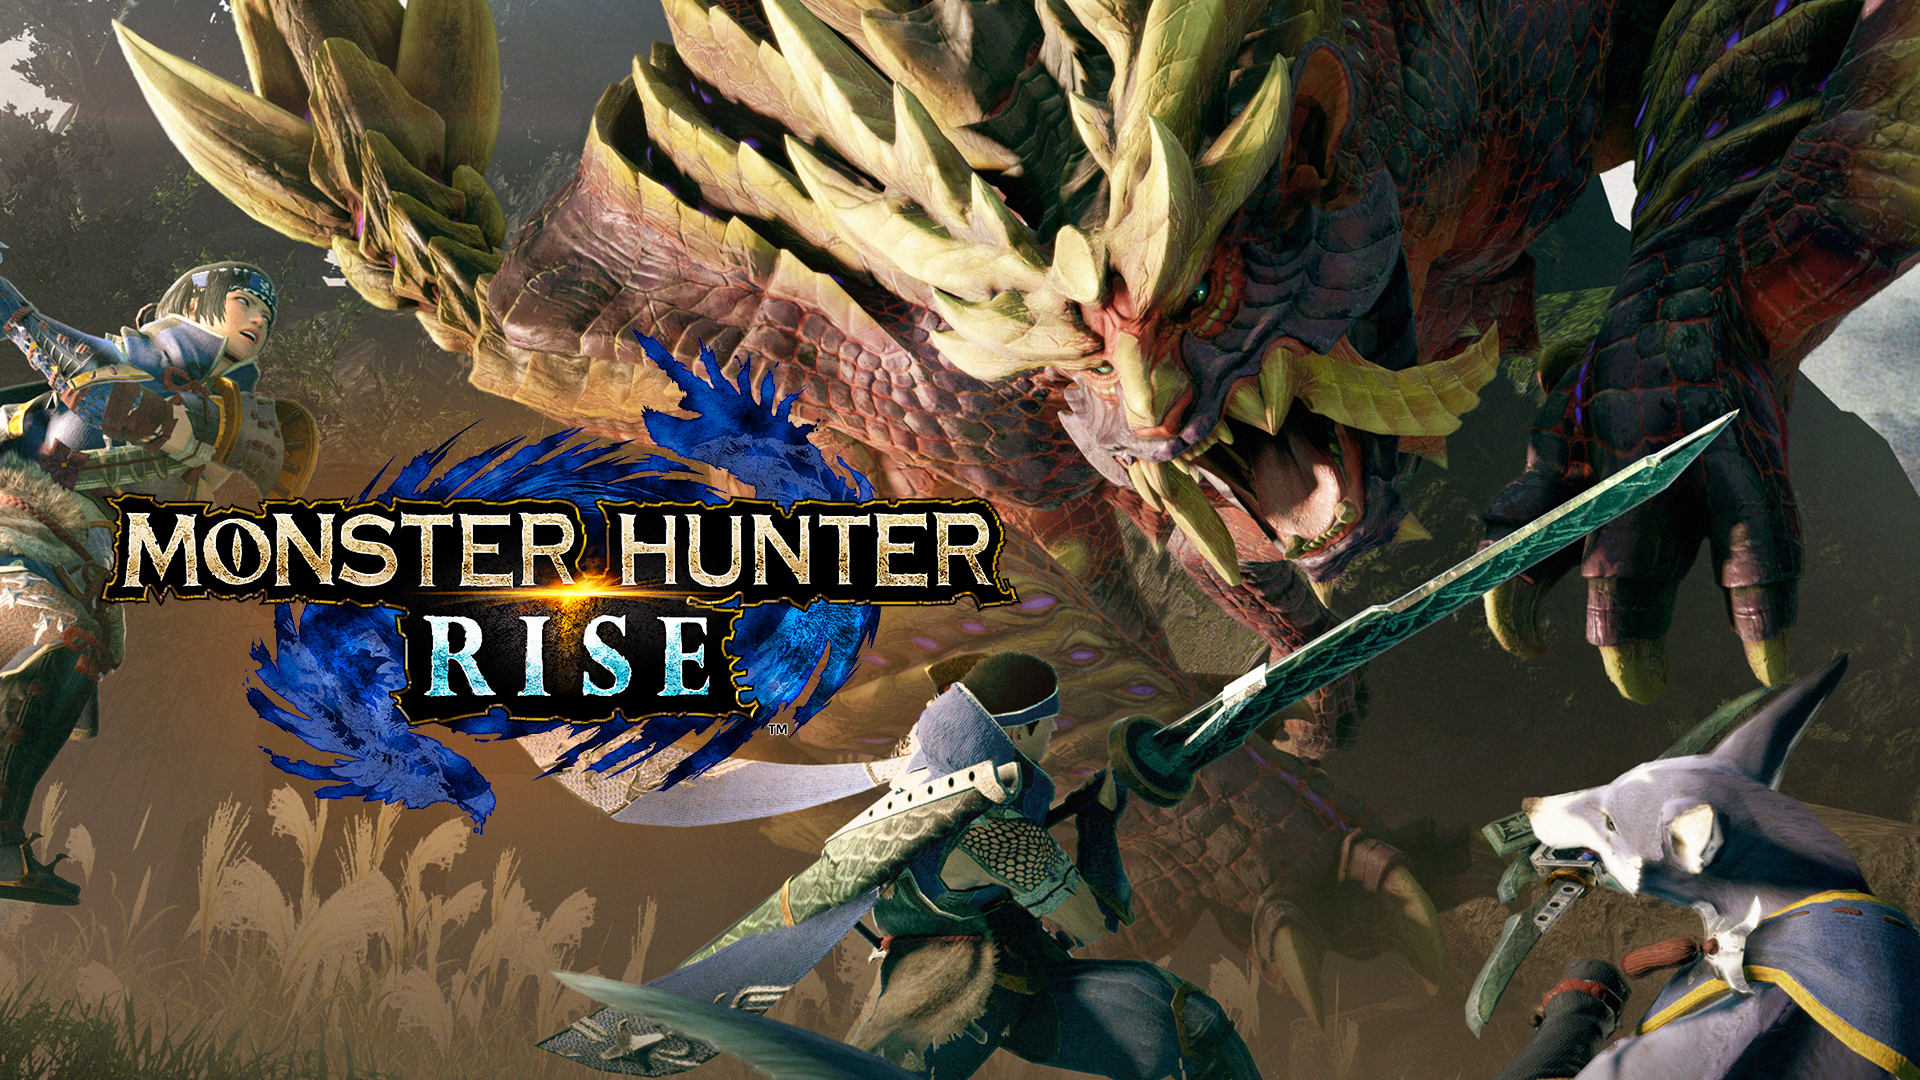 How to Play Coop In Monster Hunter Rise